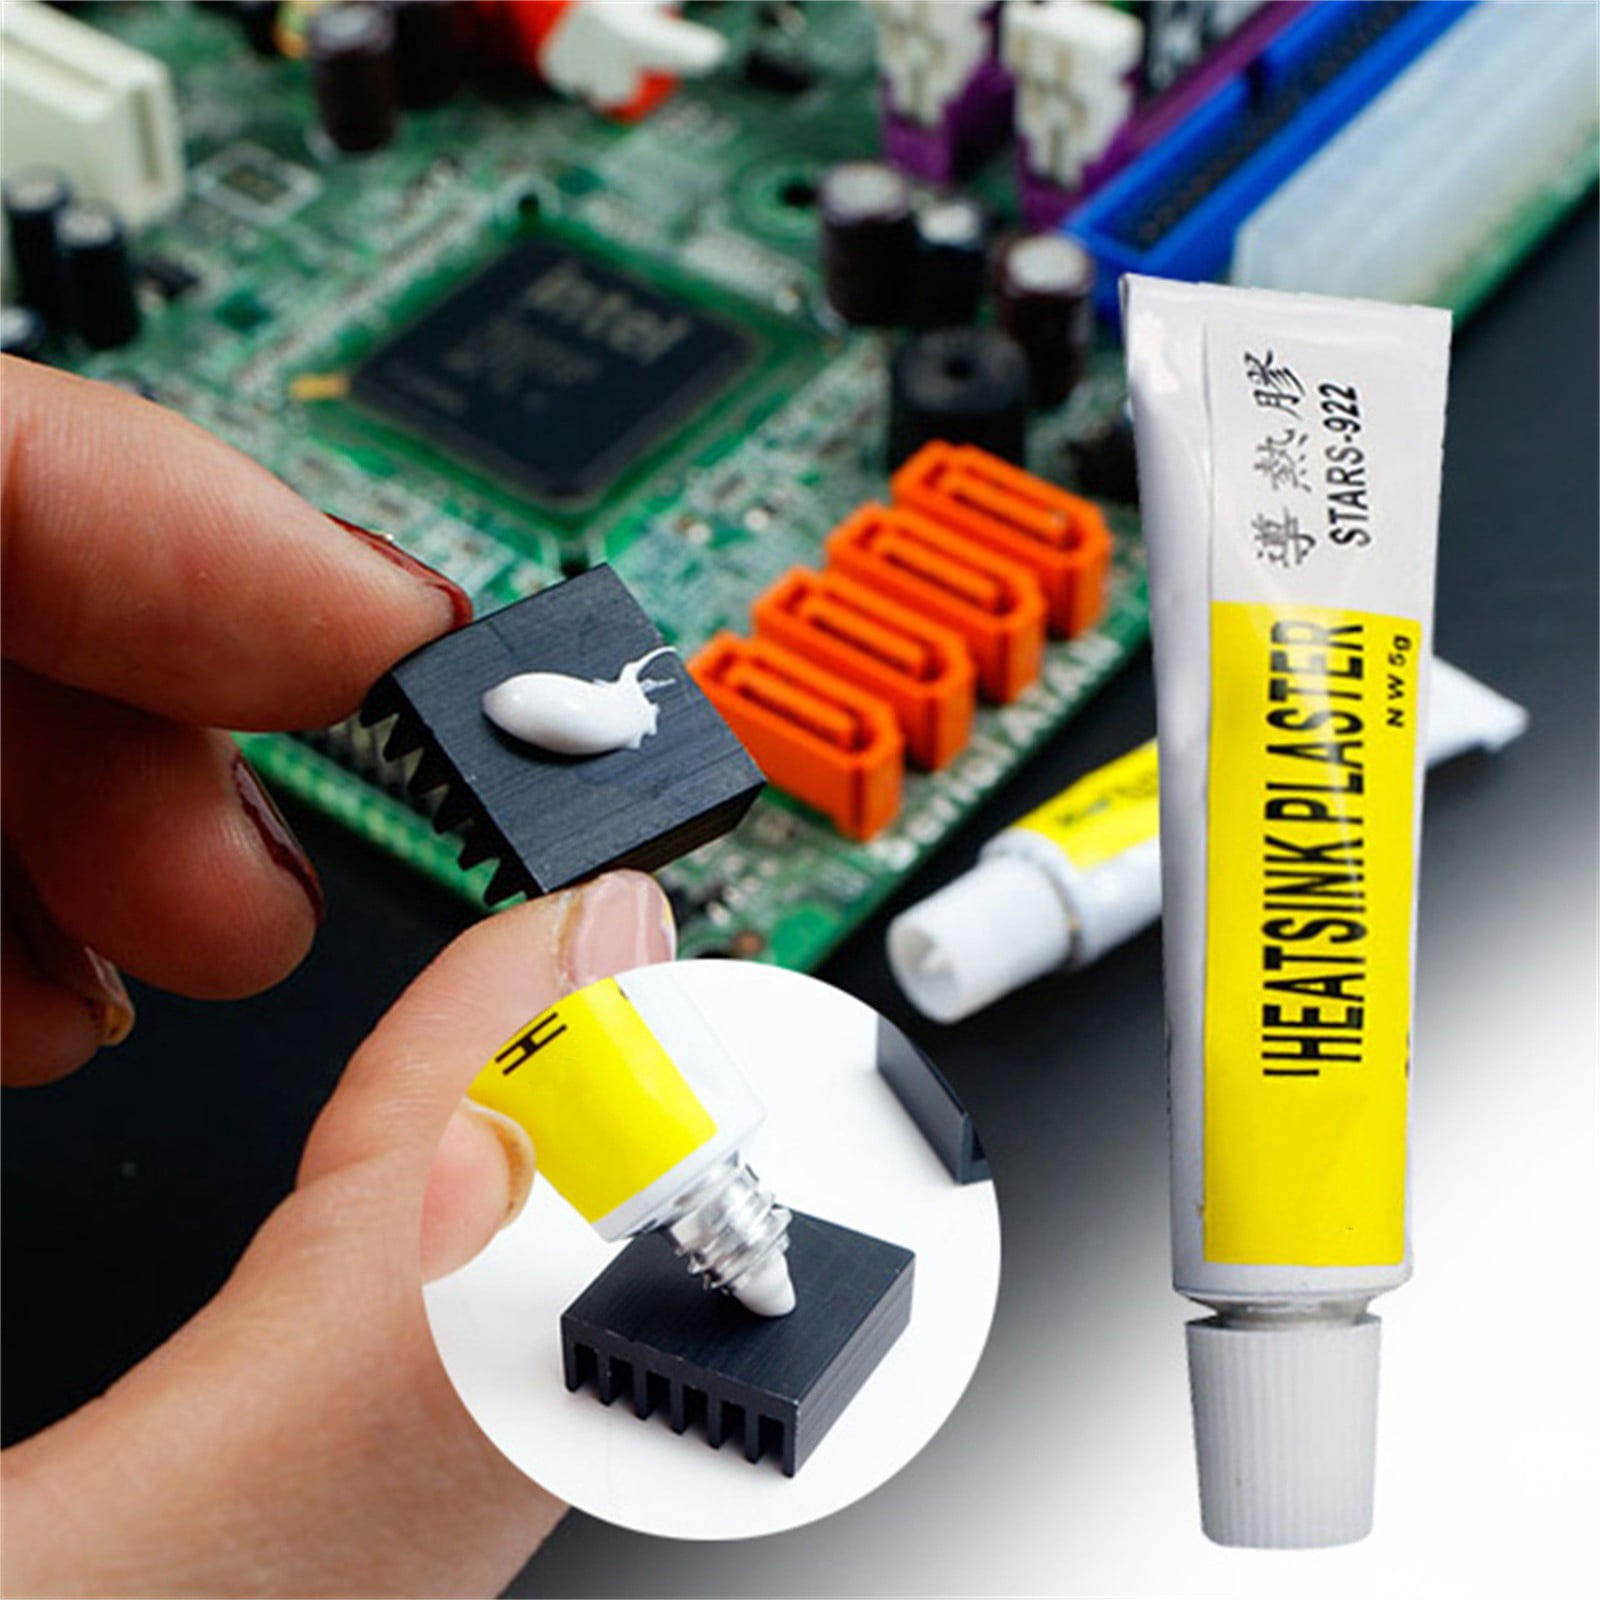 Ht8815 Uv Glue & Adhesive Replace Silicone Paste Led From China